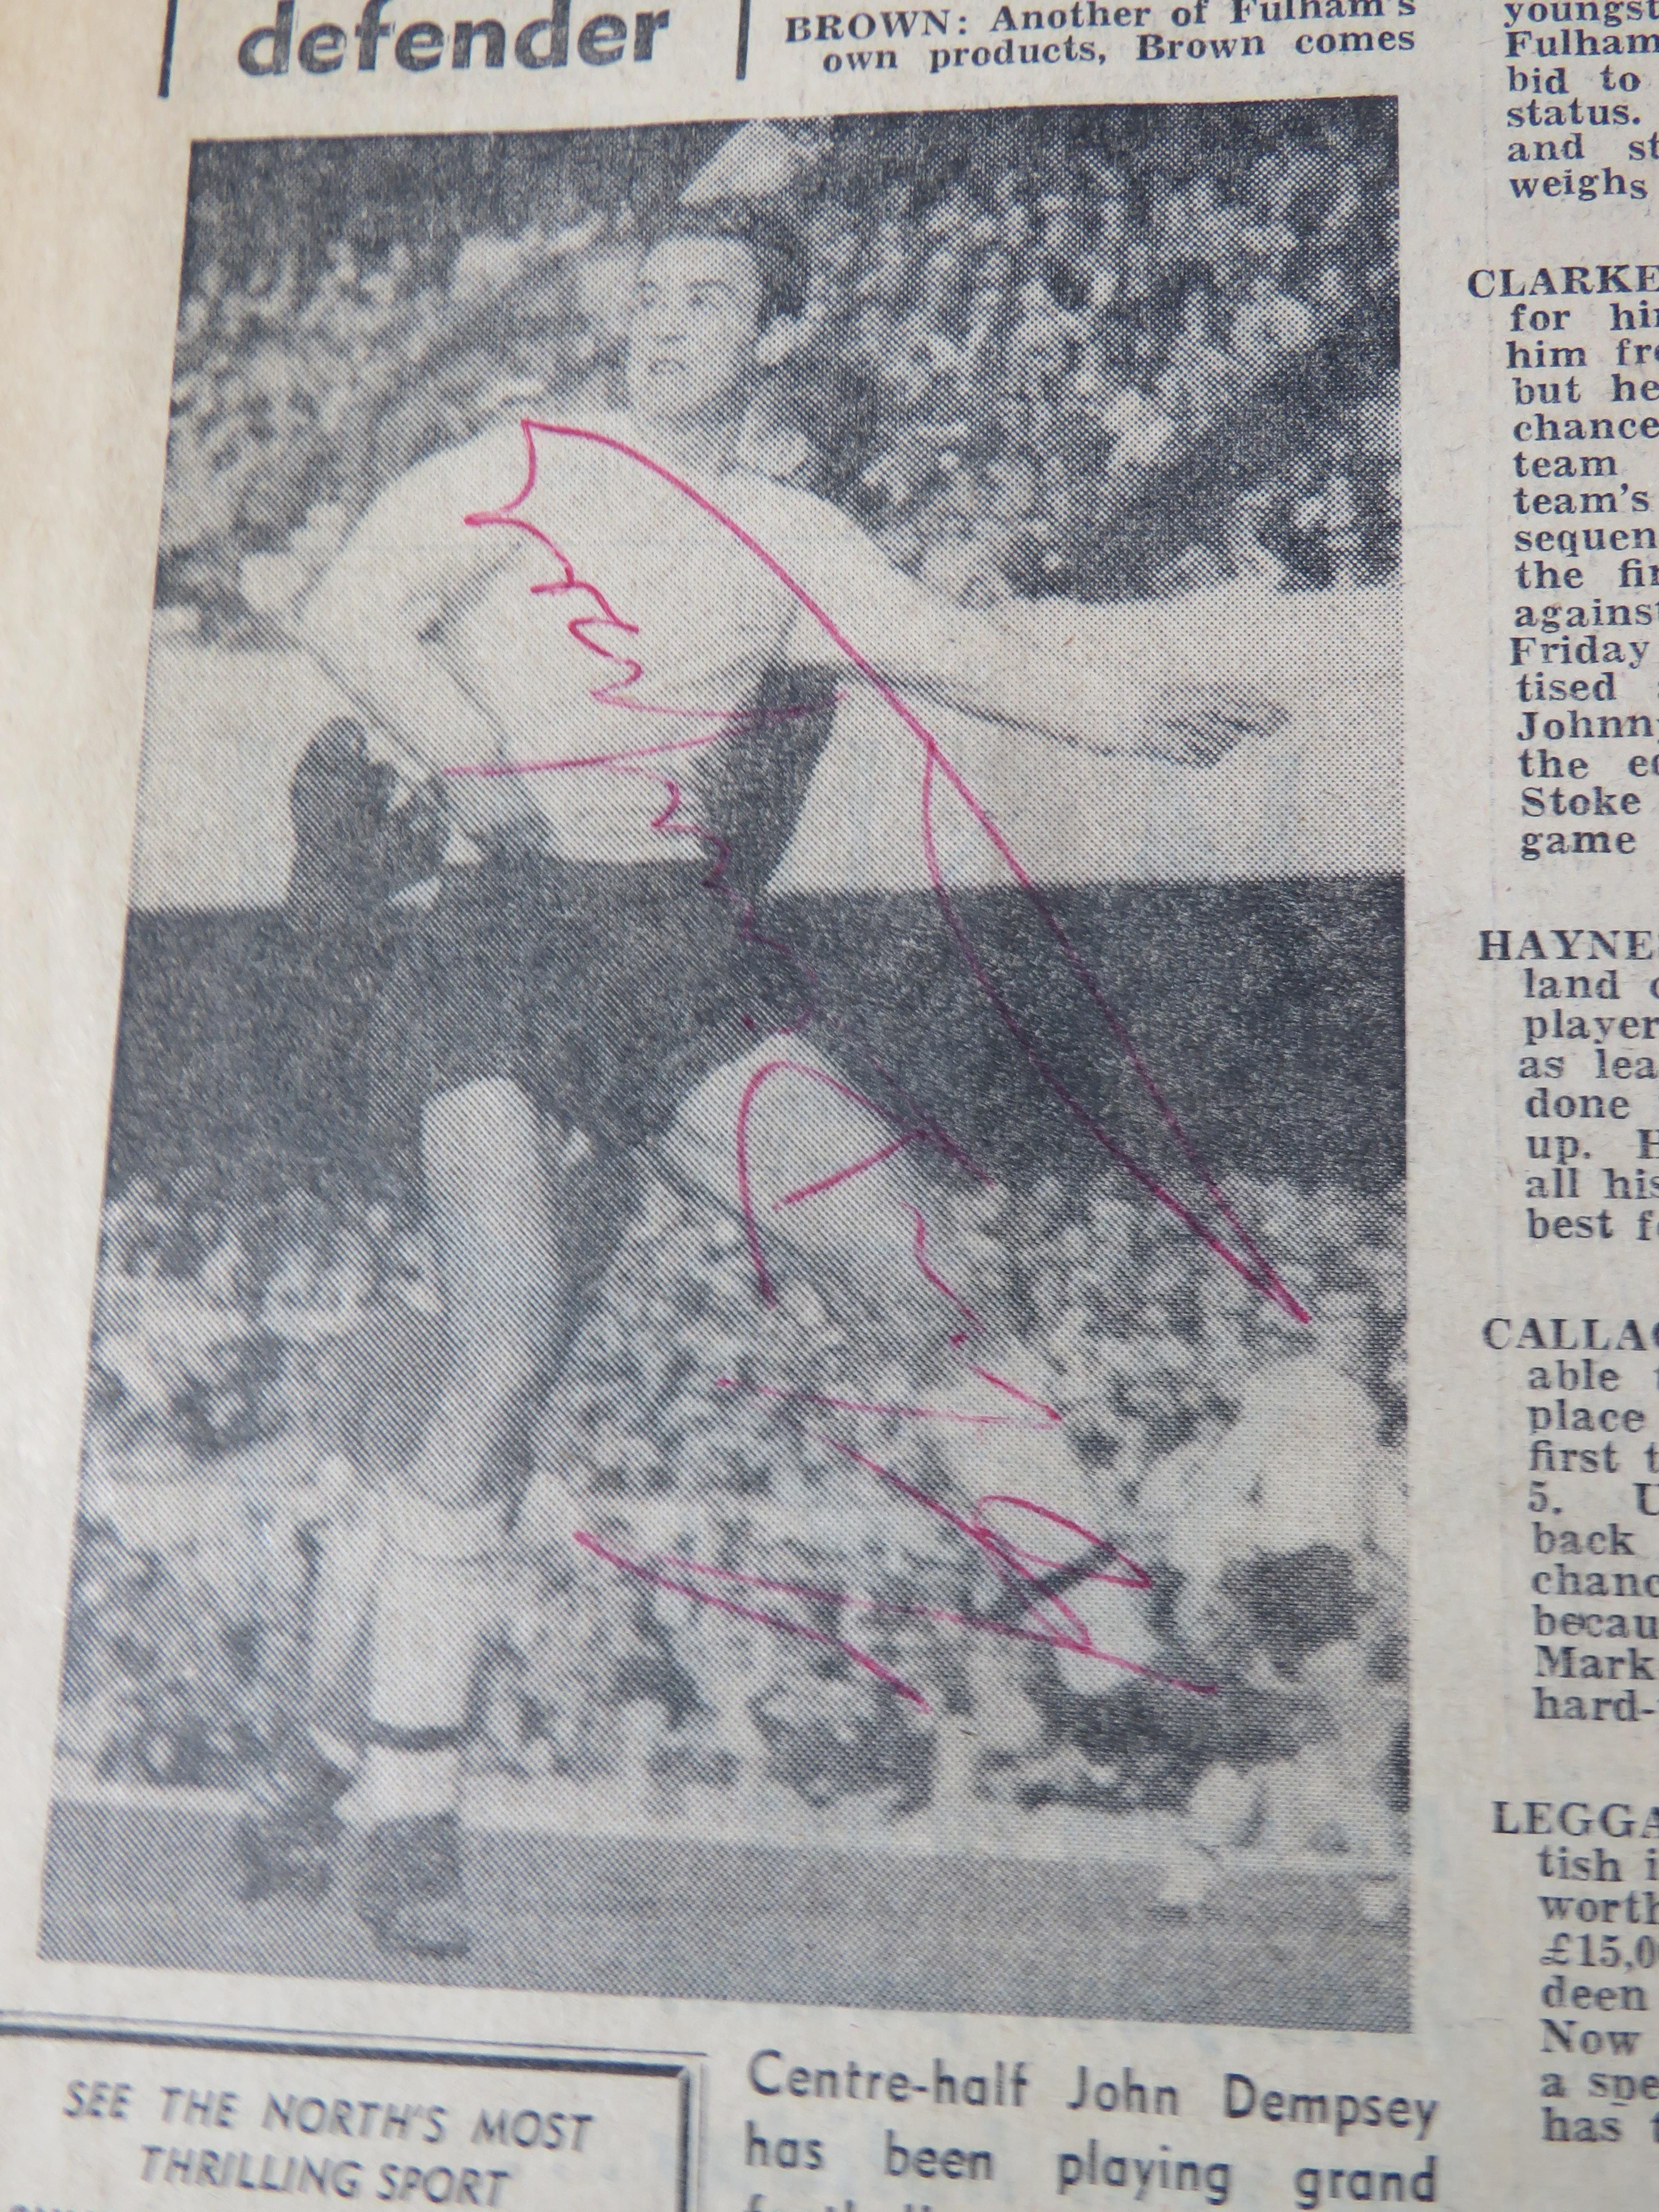 Sporting Magazines dating from 1950's, Newcastle United Match day programme from 1966 plus autograph - Image 10 of 11